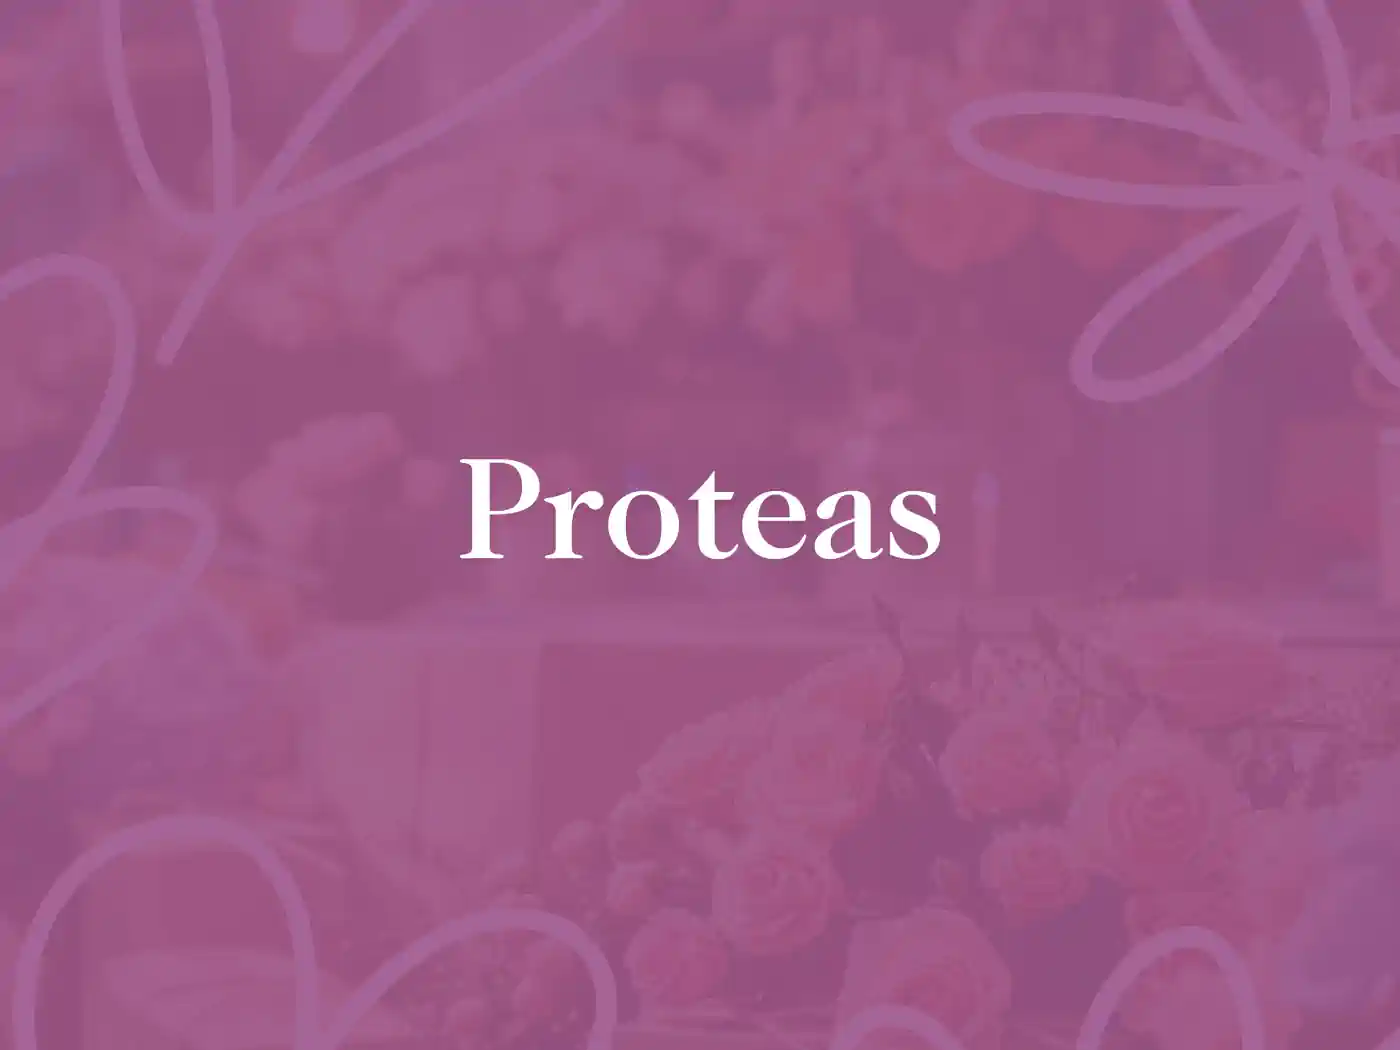 Proteas title card - Fabulous Flowers and Gifts, Proteas Collection